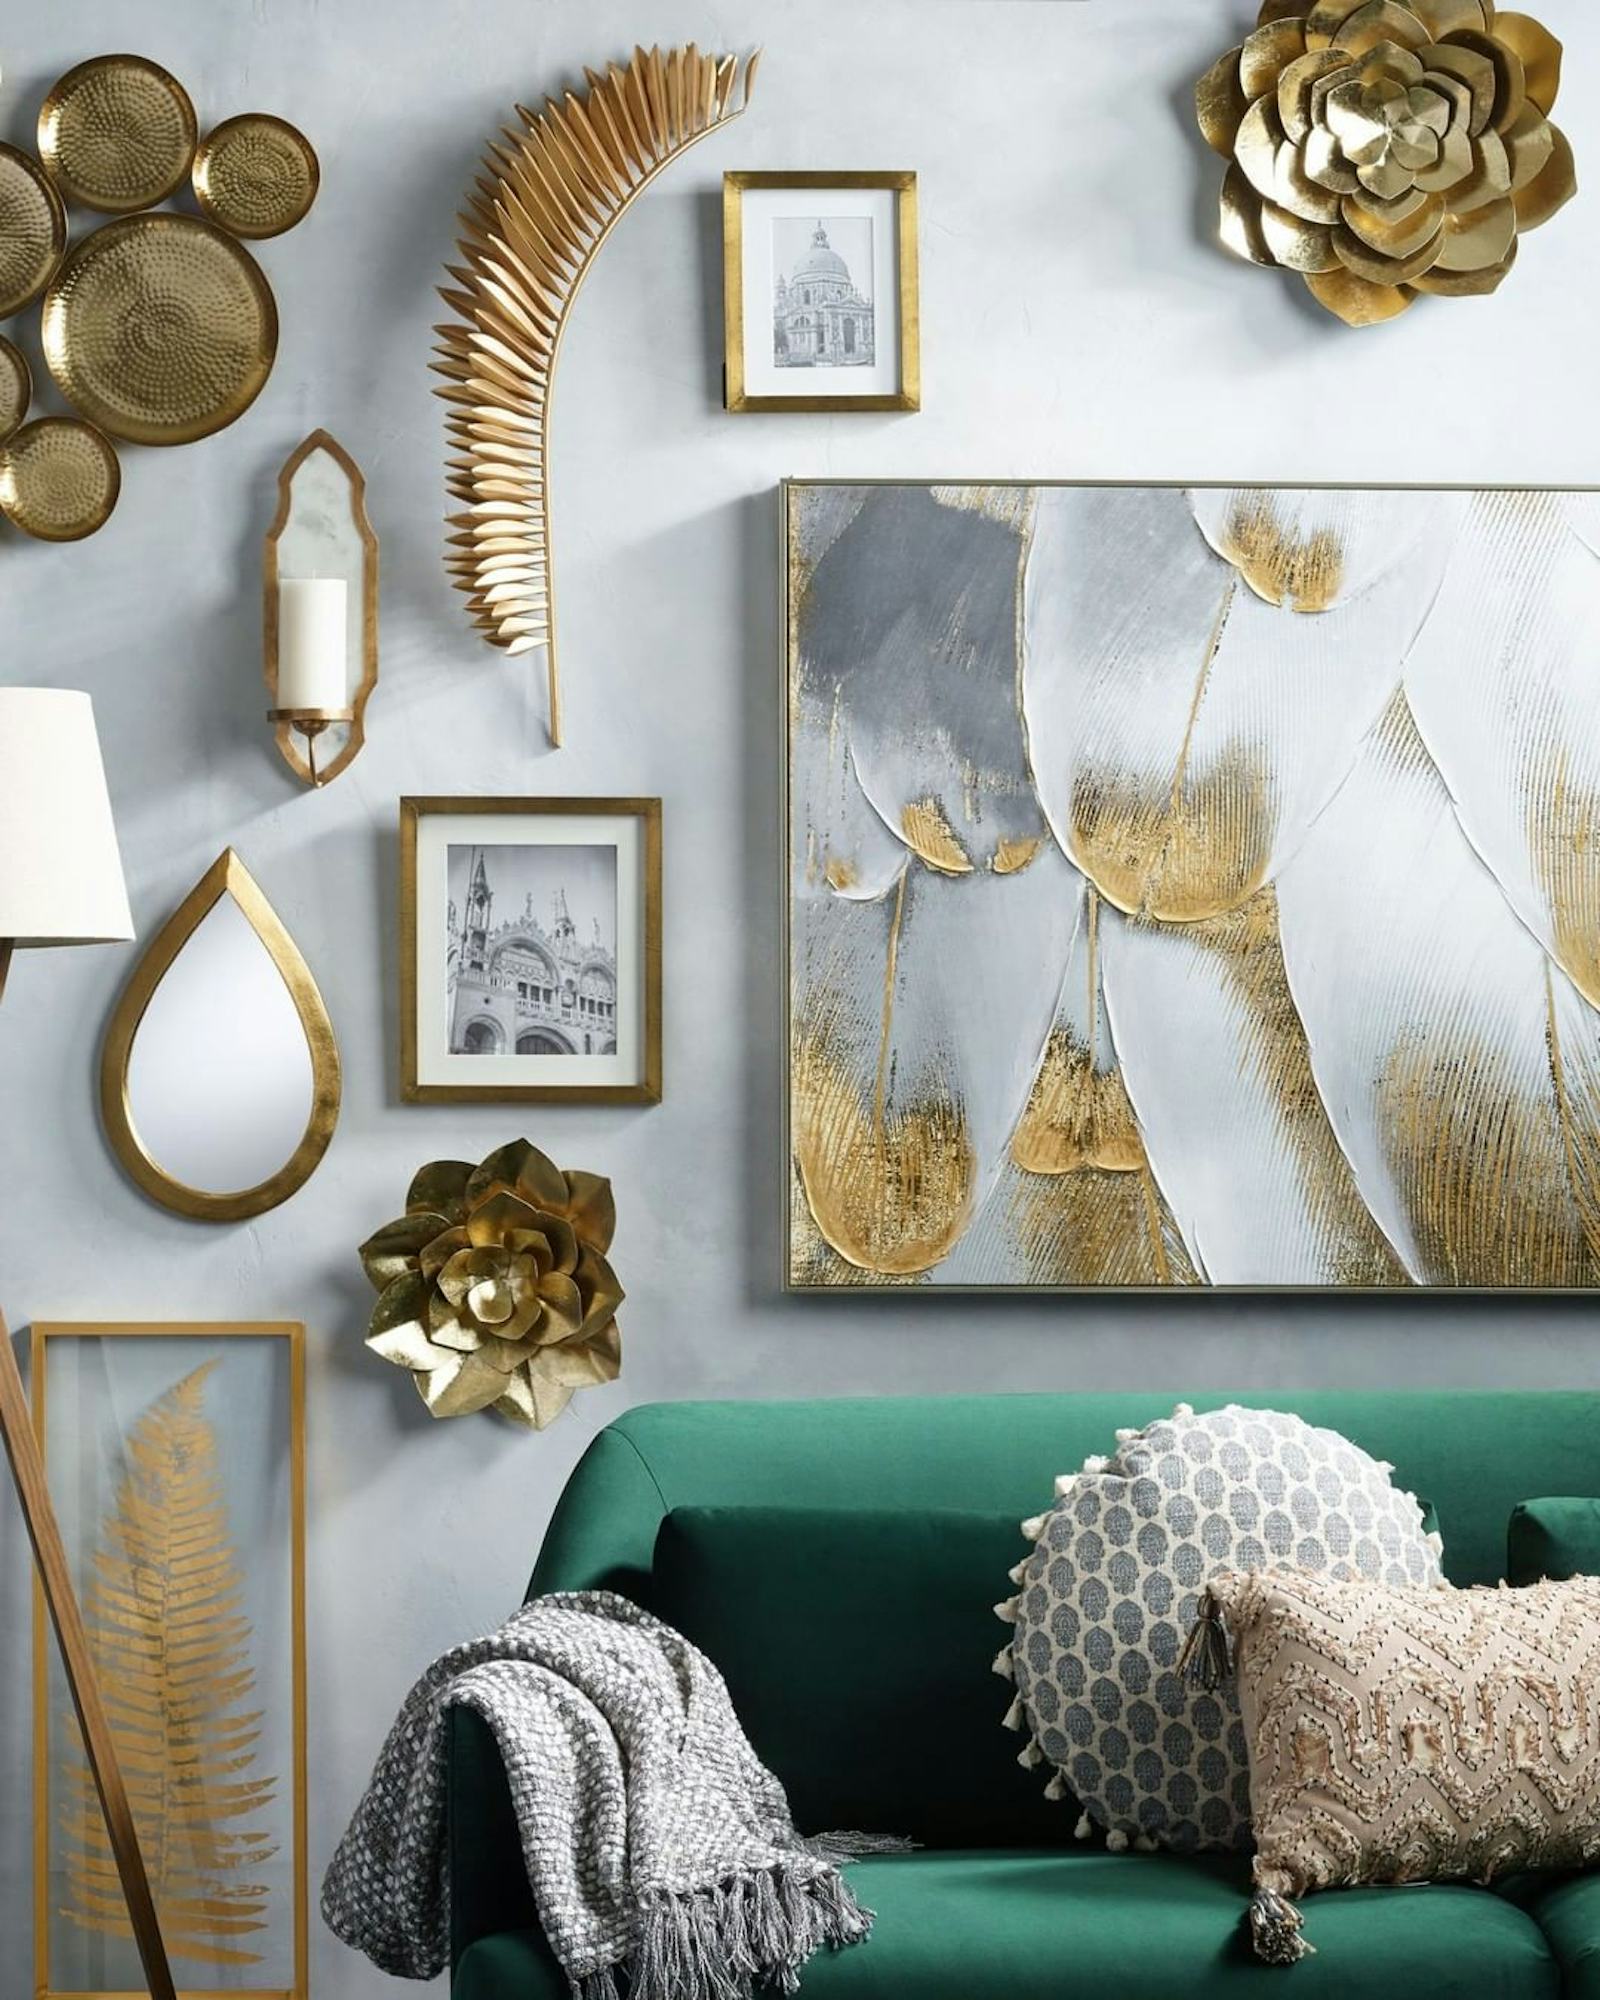 World Market Wall Decor Under $100 That Will Give Your Living Room Some